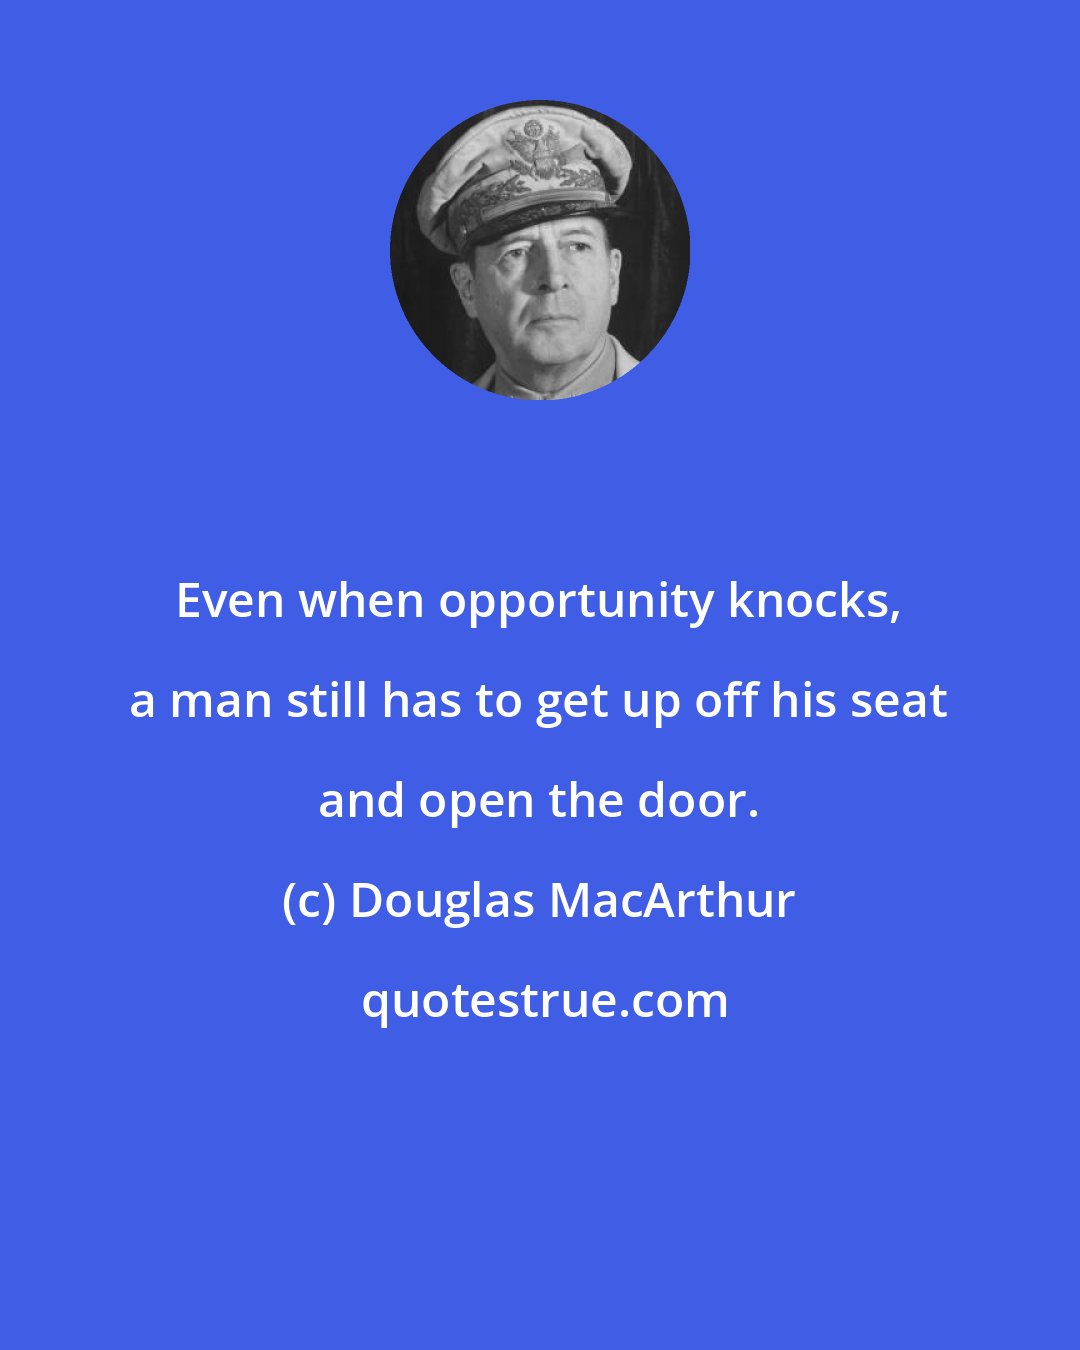 Douglas MacArthur: Even when opportunity knocks, a man still has to get up off his seat and open the door.